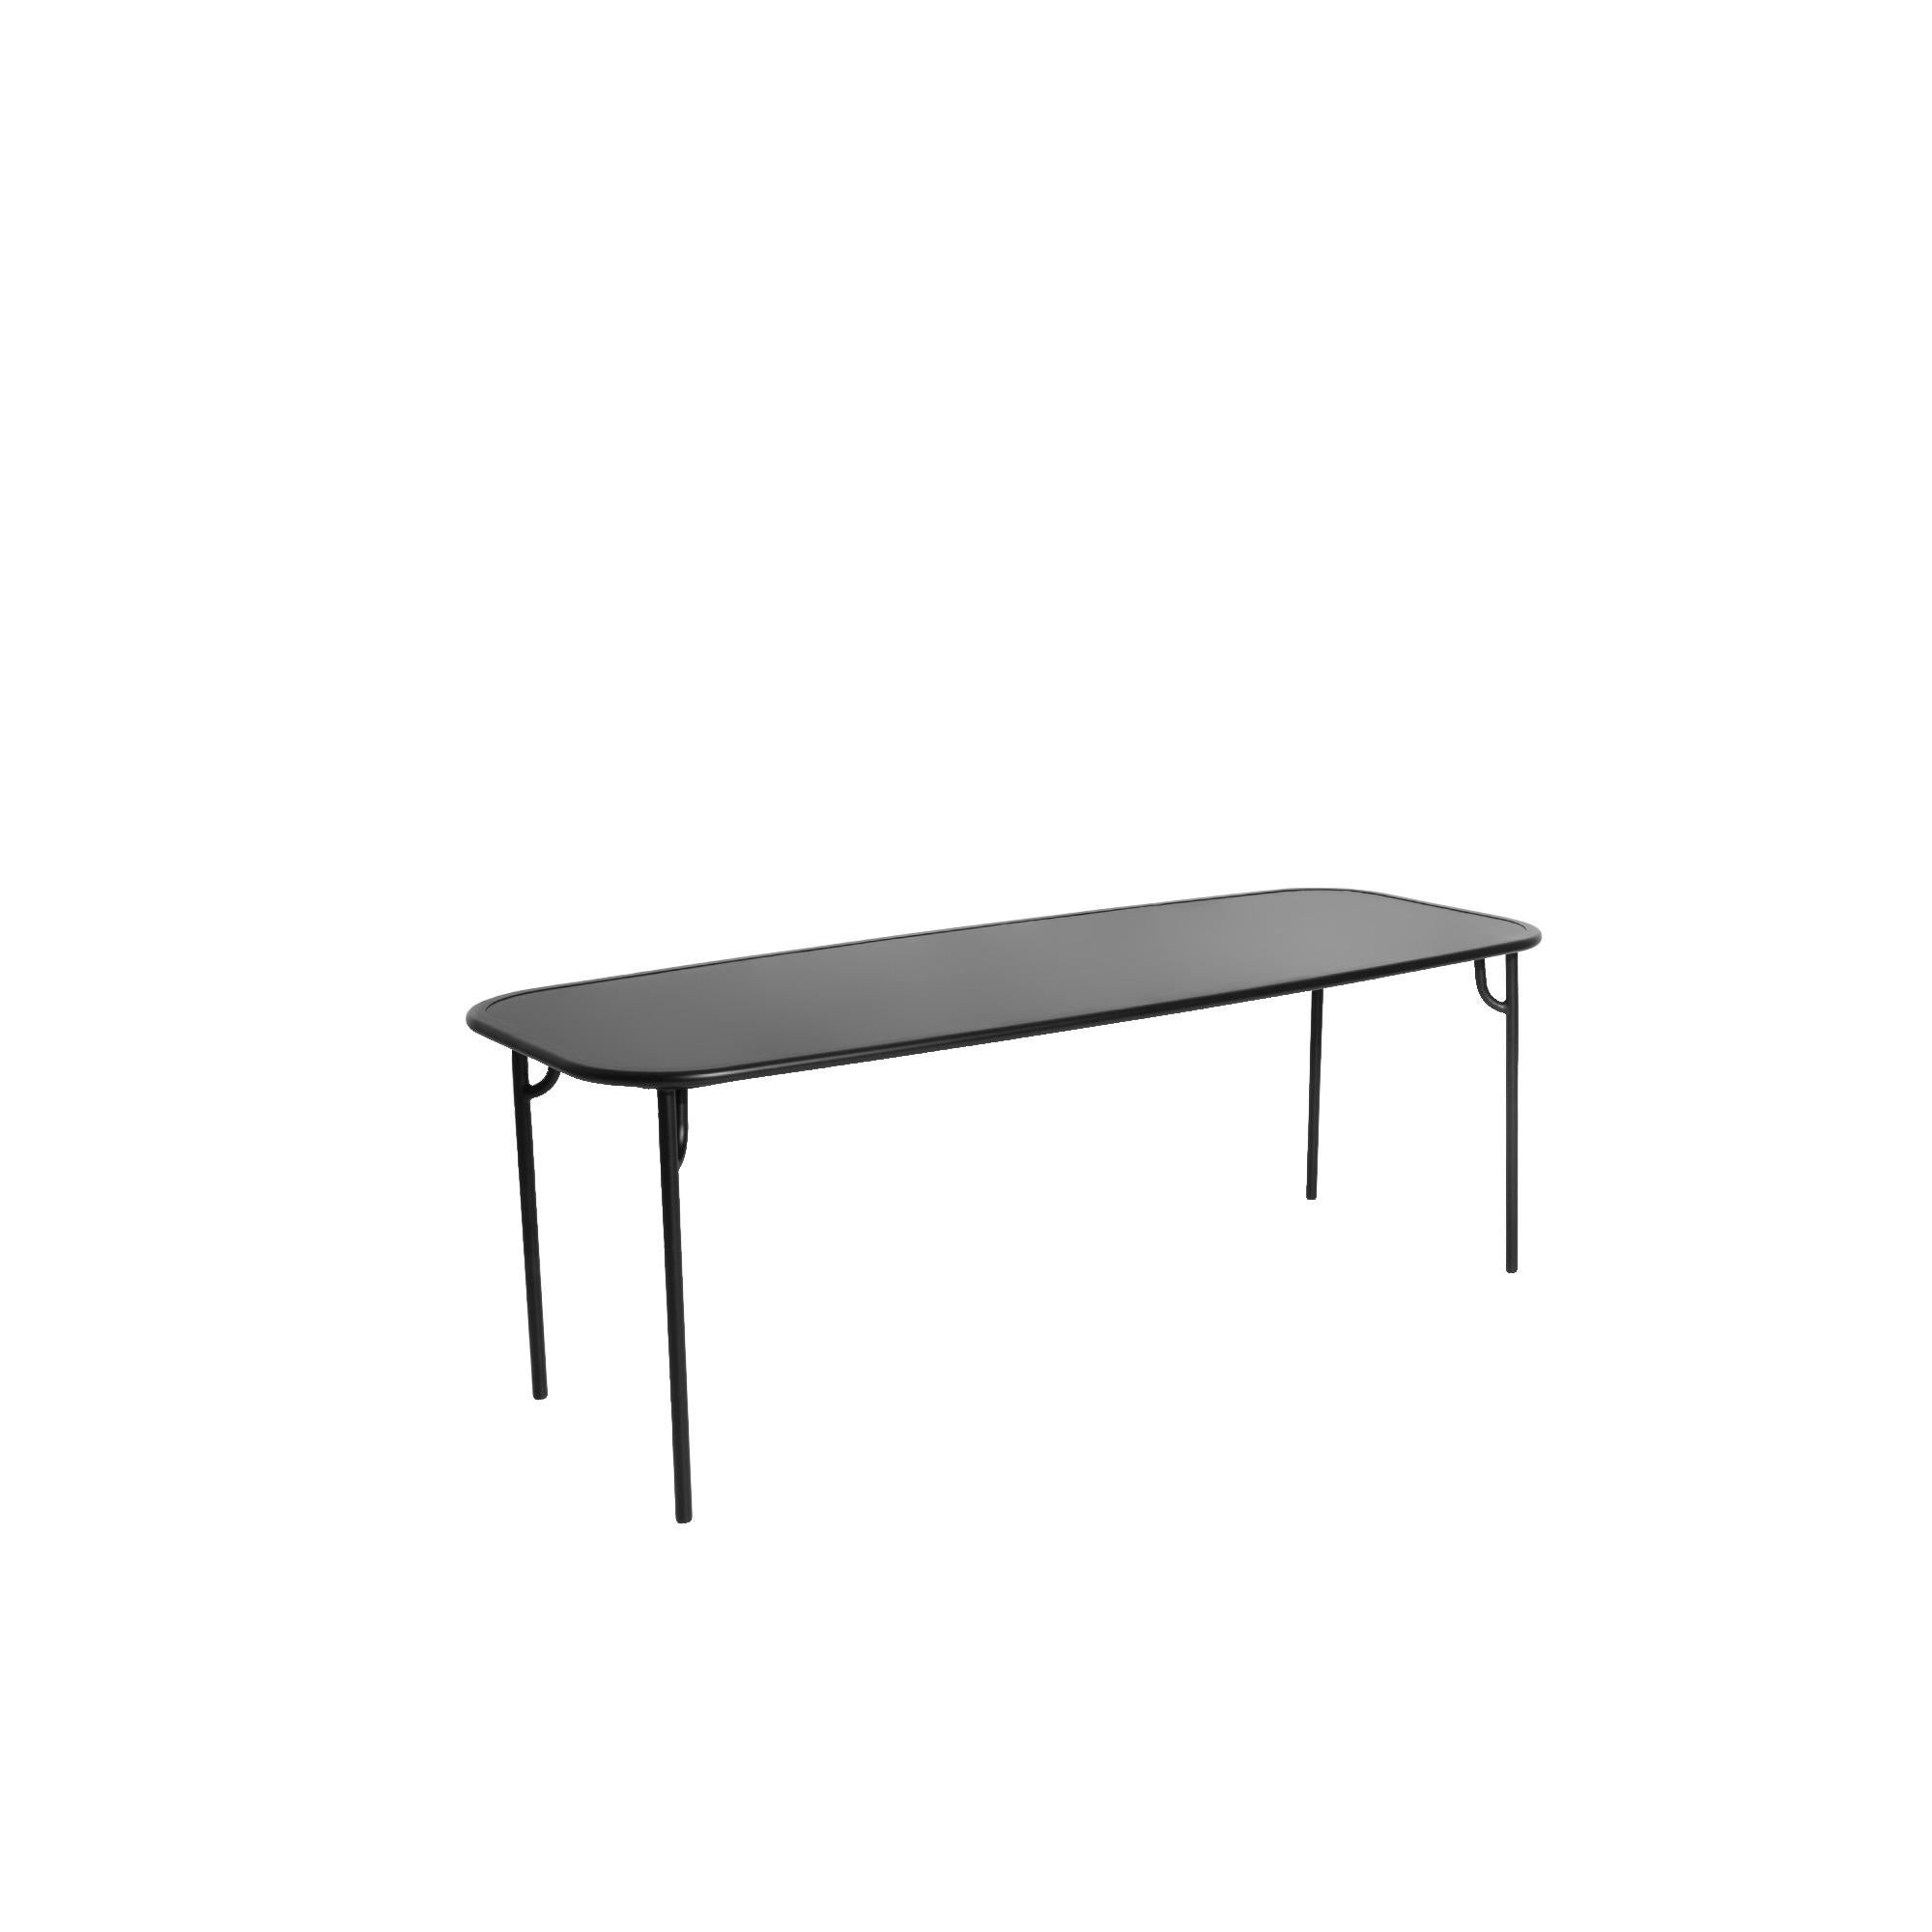 Petite Friture Week-End Large Plain Rectangular Dining Table in Black Aluminium by Studio BrichetZiegler, 2017

The week-end collection is a full range of outdoor furniture, in aluminium grained epoxy paint, matt finish, that includes 18 functions